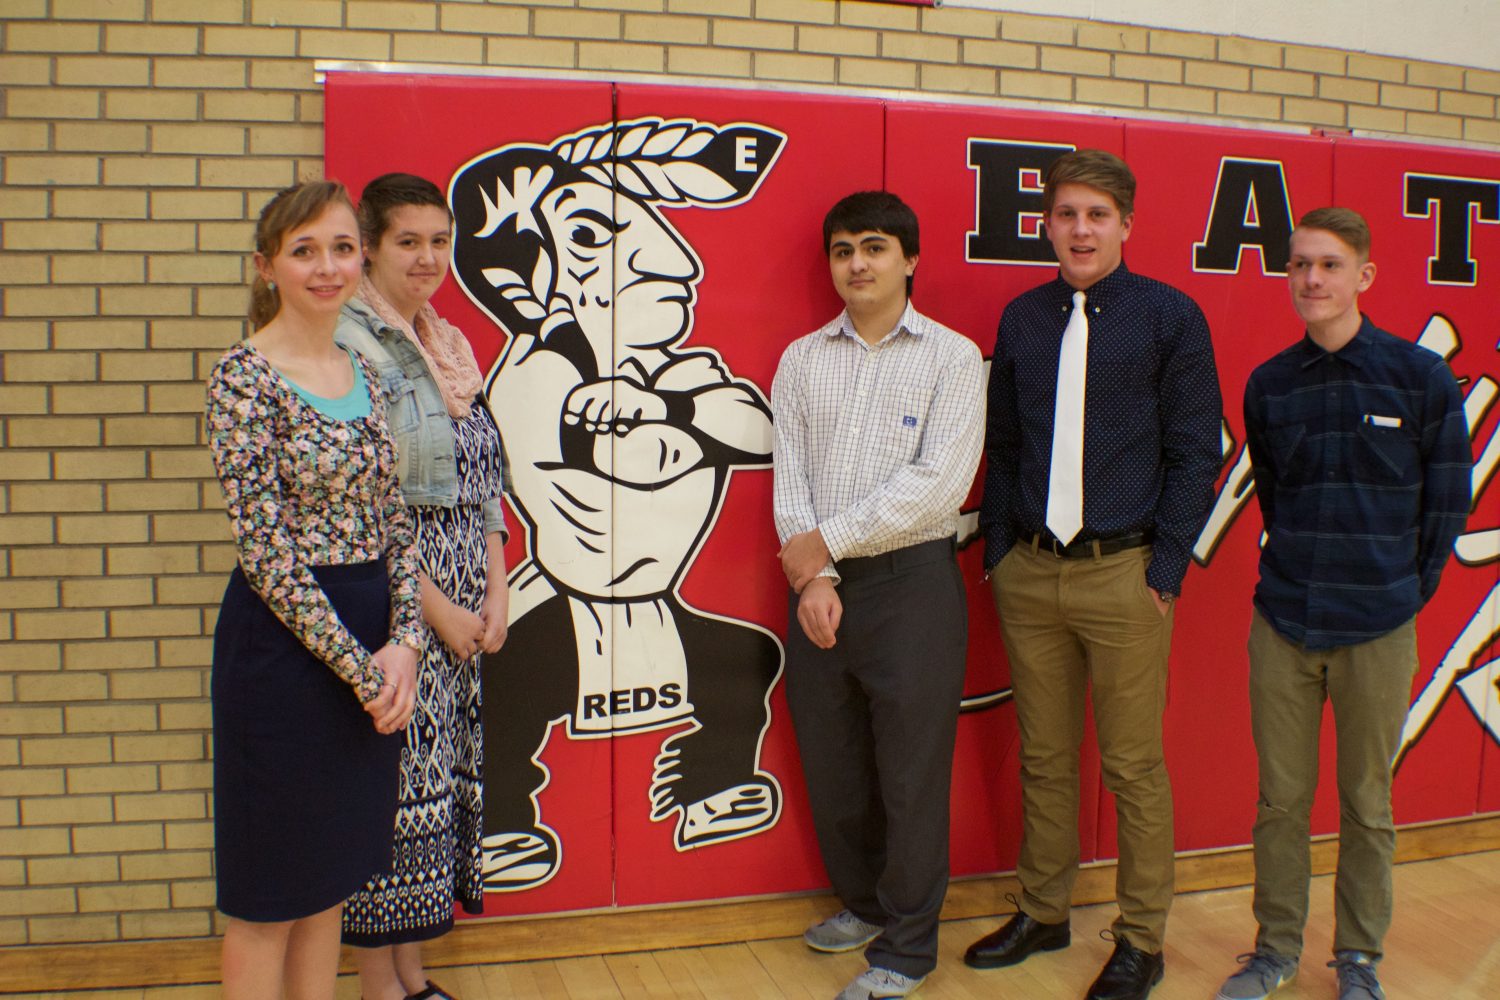 Red Ink members stand next to the mascot (left to right, Karalee Kothe(16), Sarah Jakel (17), Isaiah Cordova (17), Devan McKenney (17), and Cameron Moser (17)